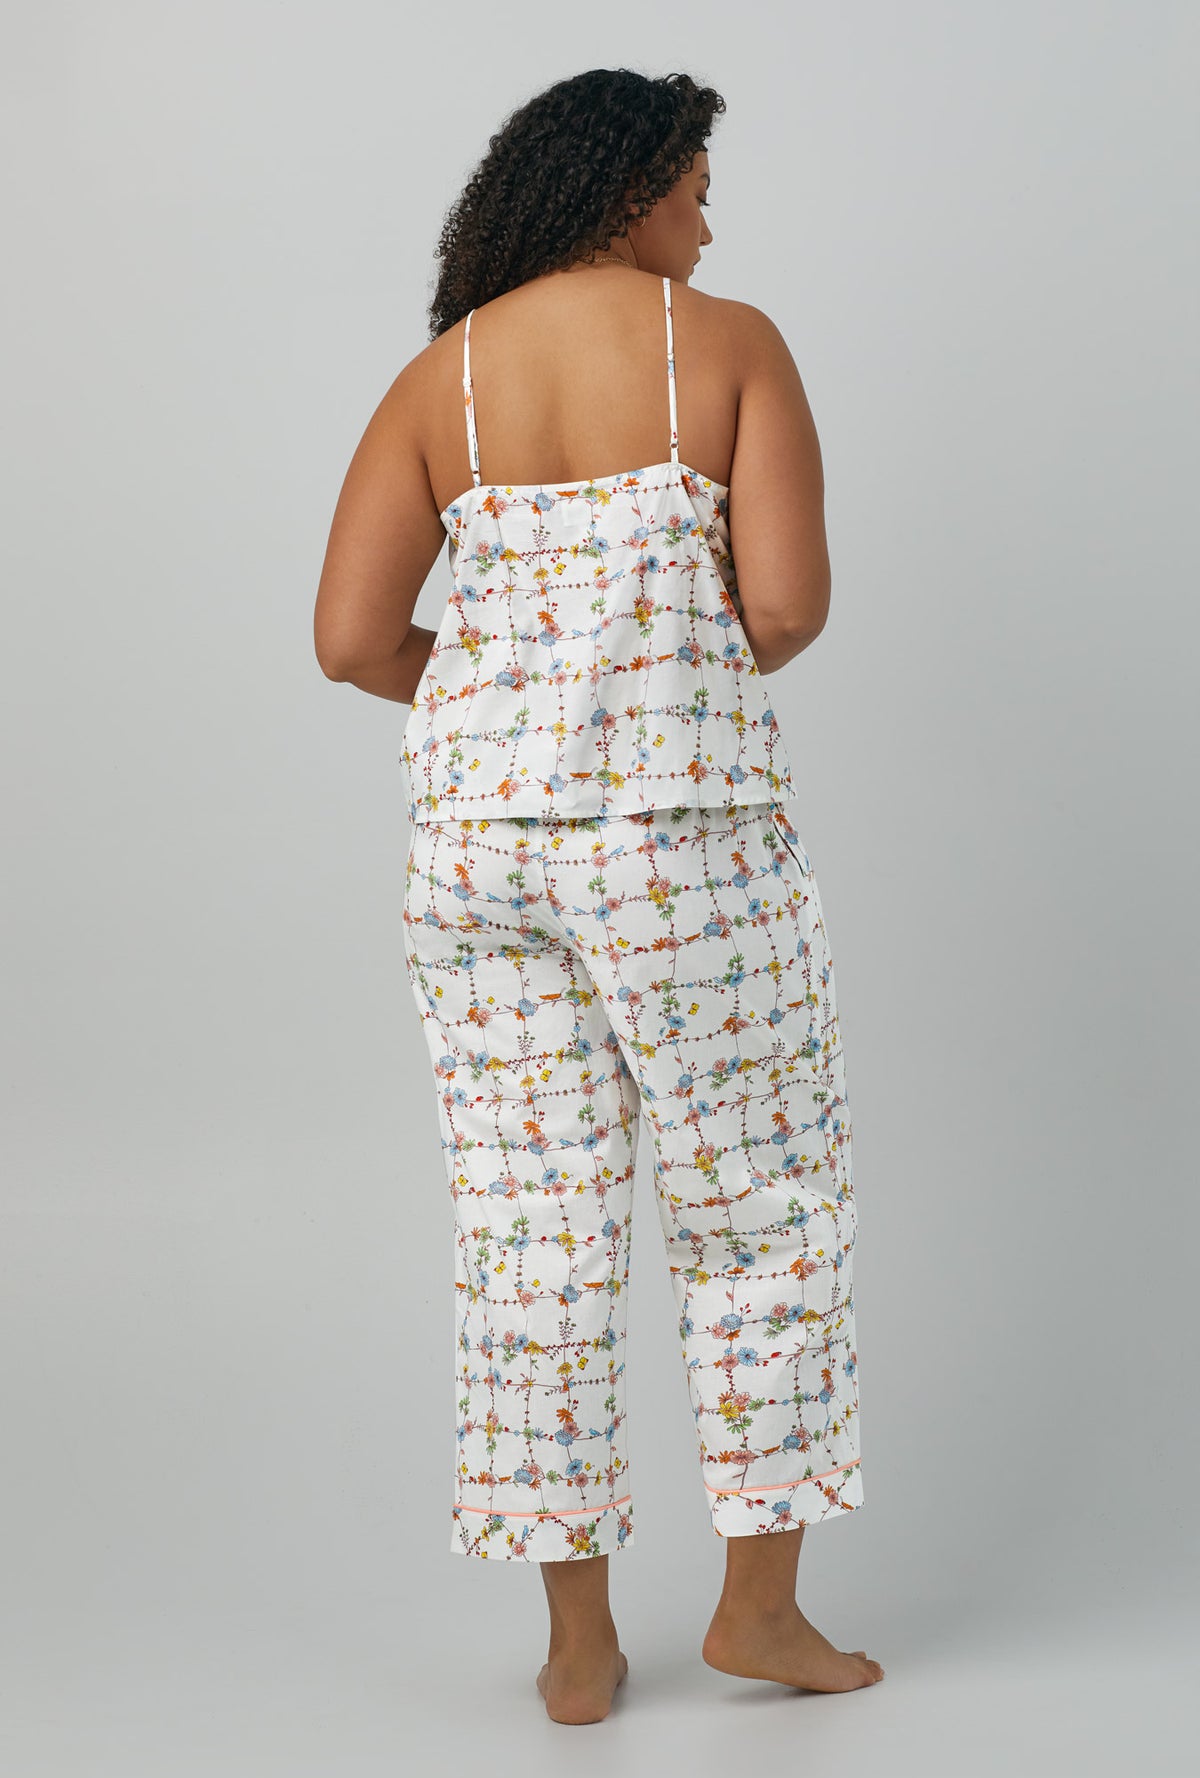 A lady wearing Tank Woven Cotton Poplin Cropped PJ Set with spring vines print